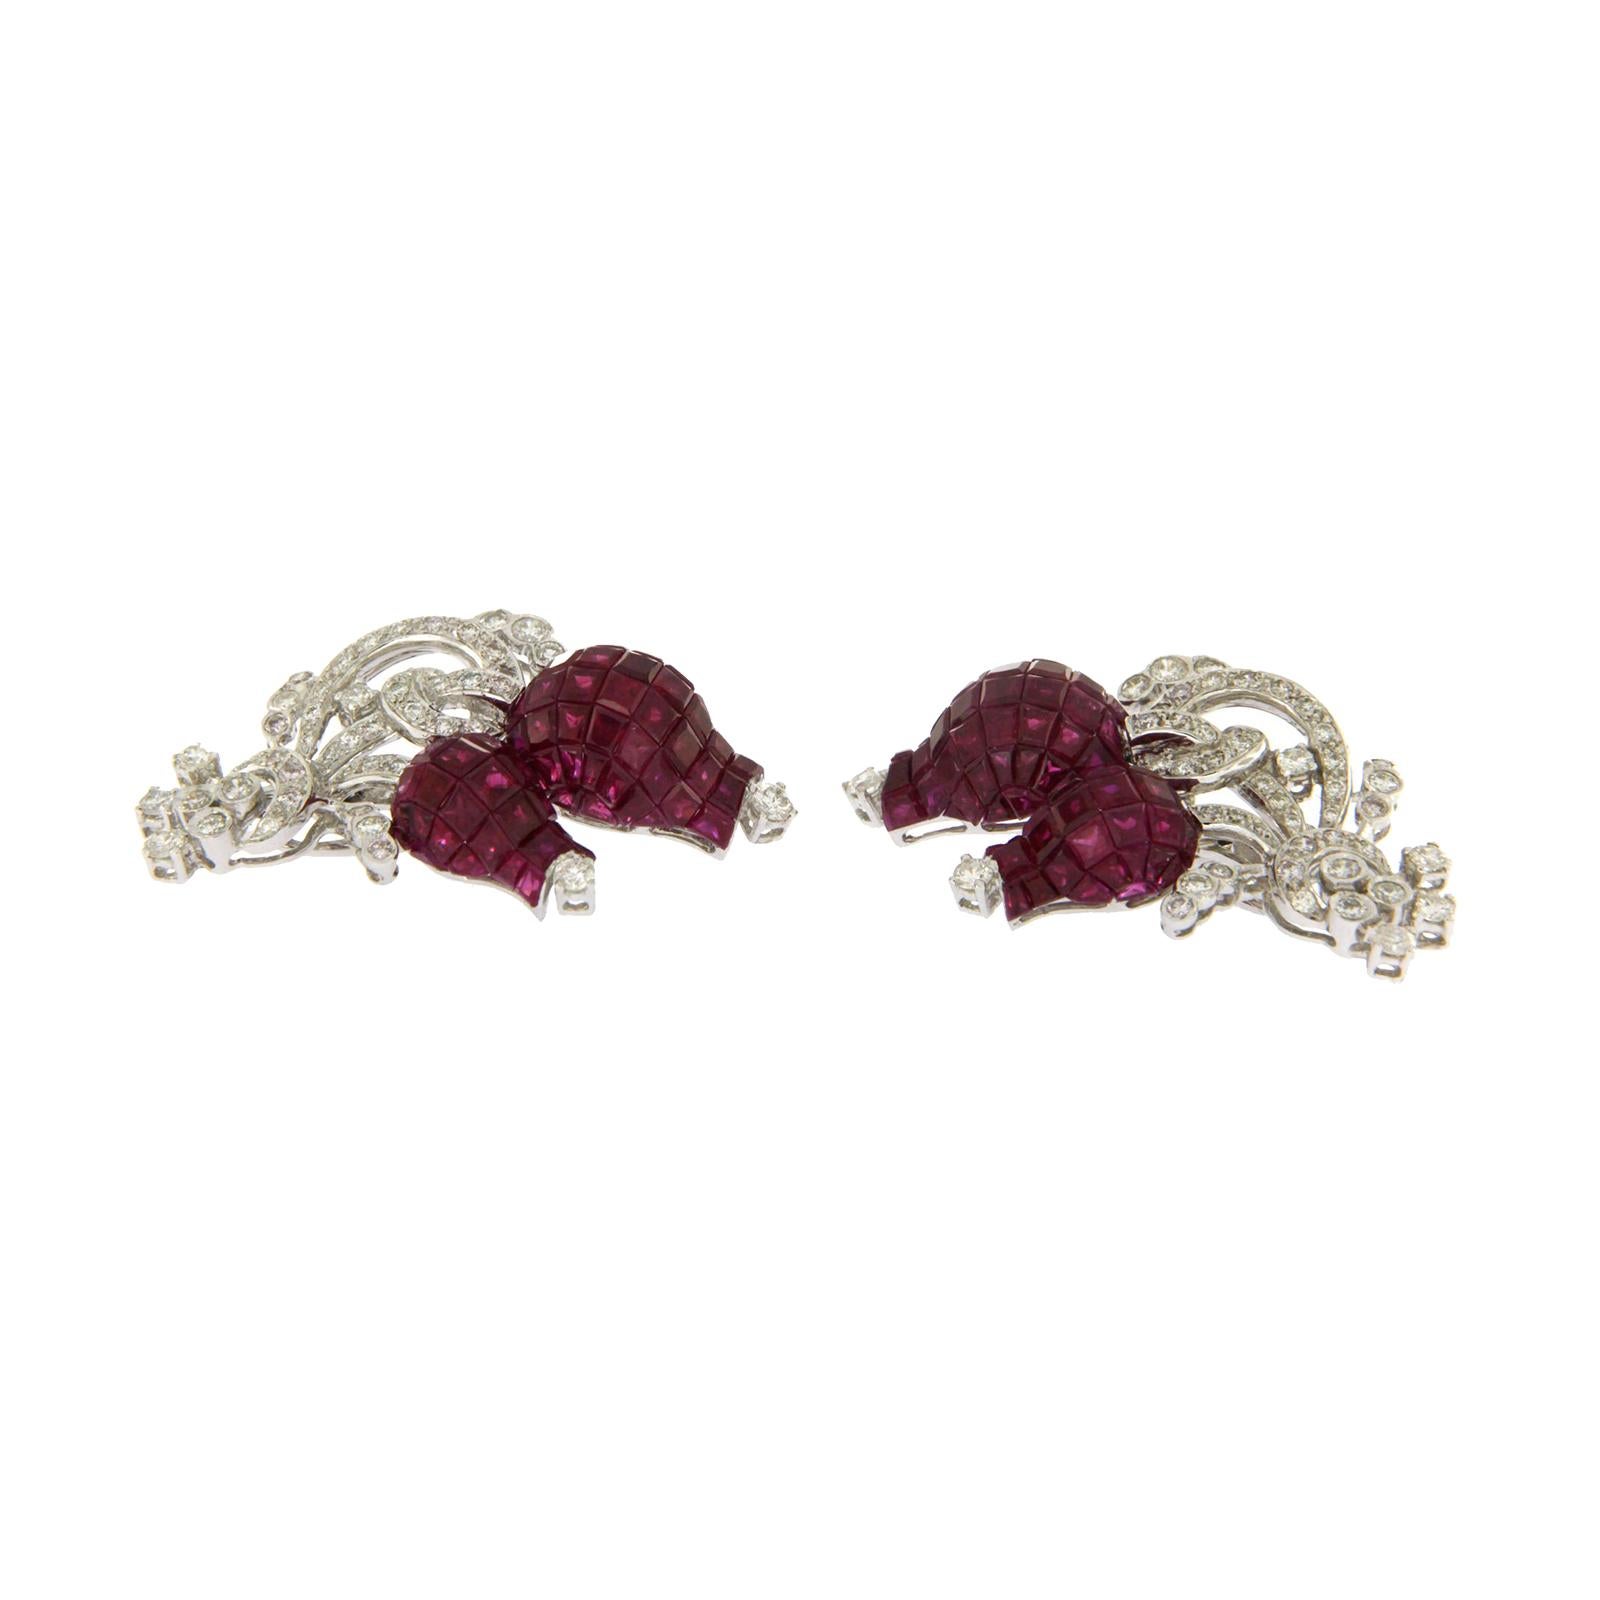 18 Kara Gold 1.99 Carat Diamonds and Invisible 25.22 Carat Ruby Tulip Earrings For Sale 3